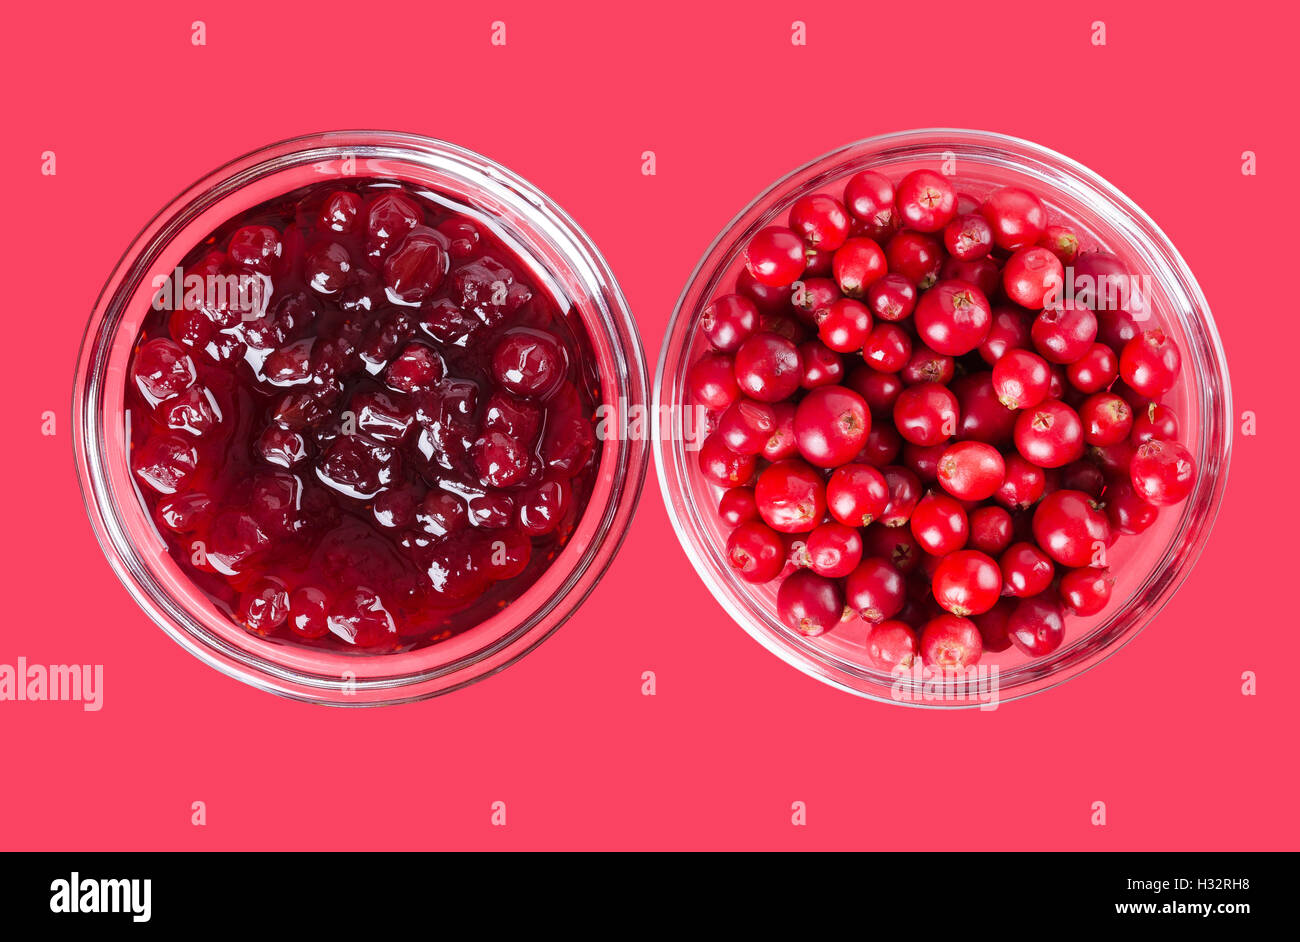 Lingonberry jam and lingonberries in glass bowls over pink. Fresh red fruits of Vaccinium vitis-idaea, also mountain cranberries Stock Photo